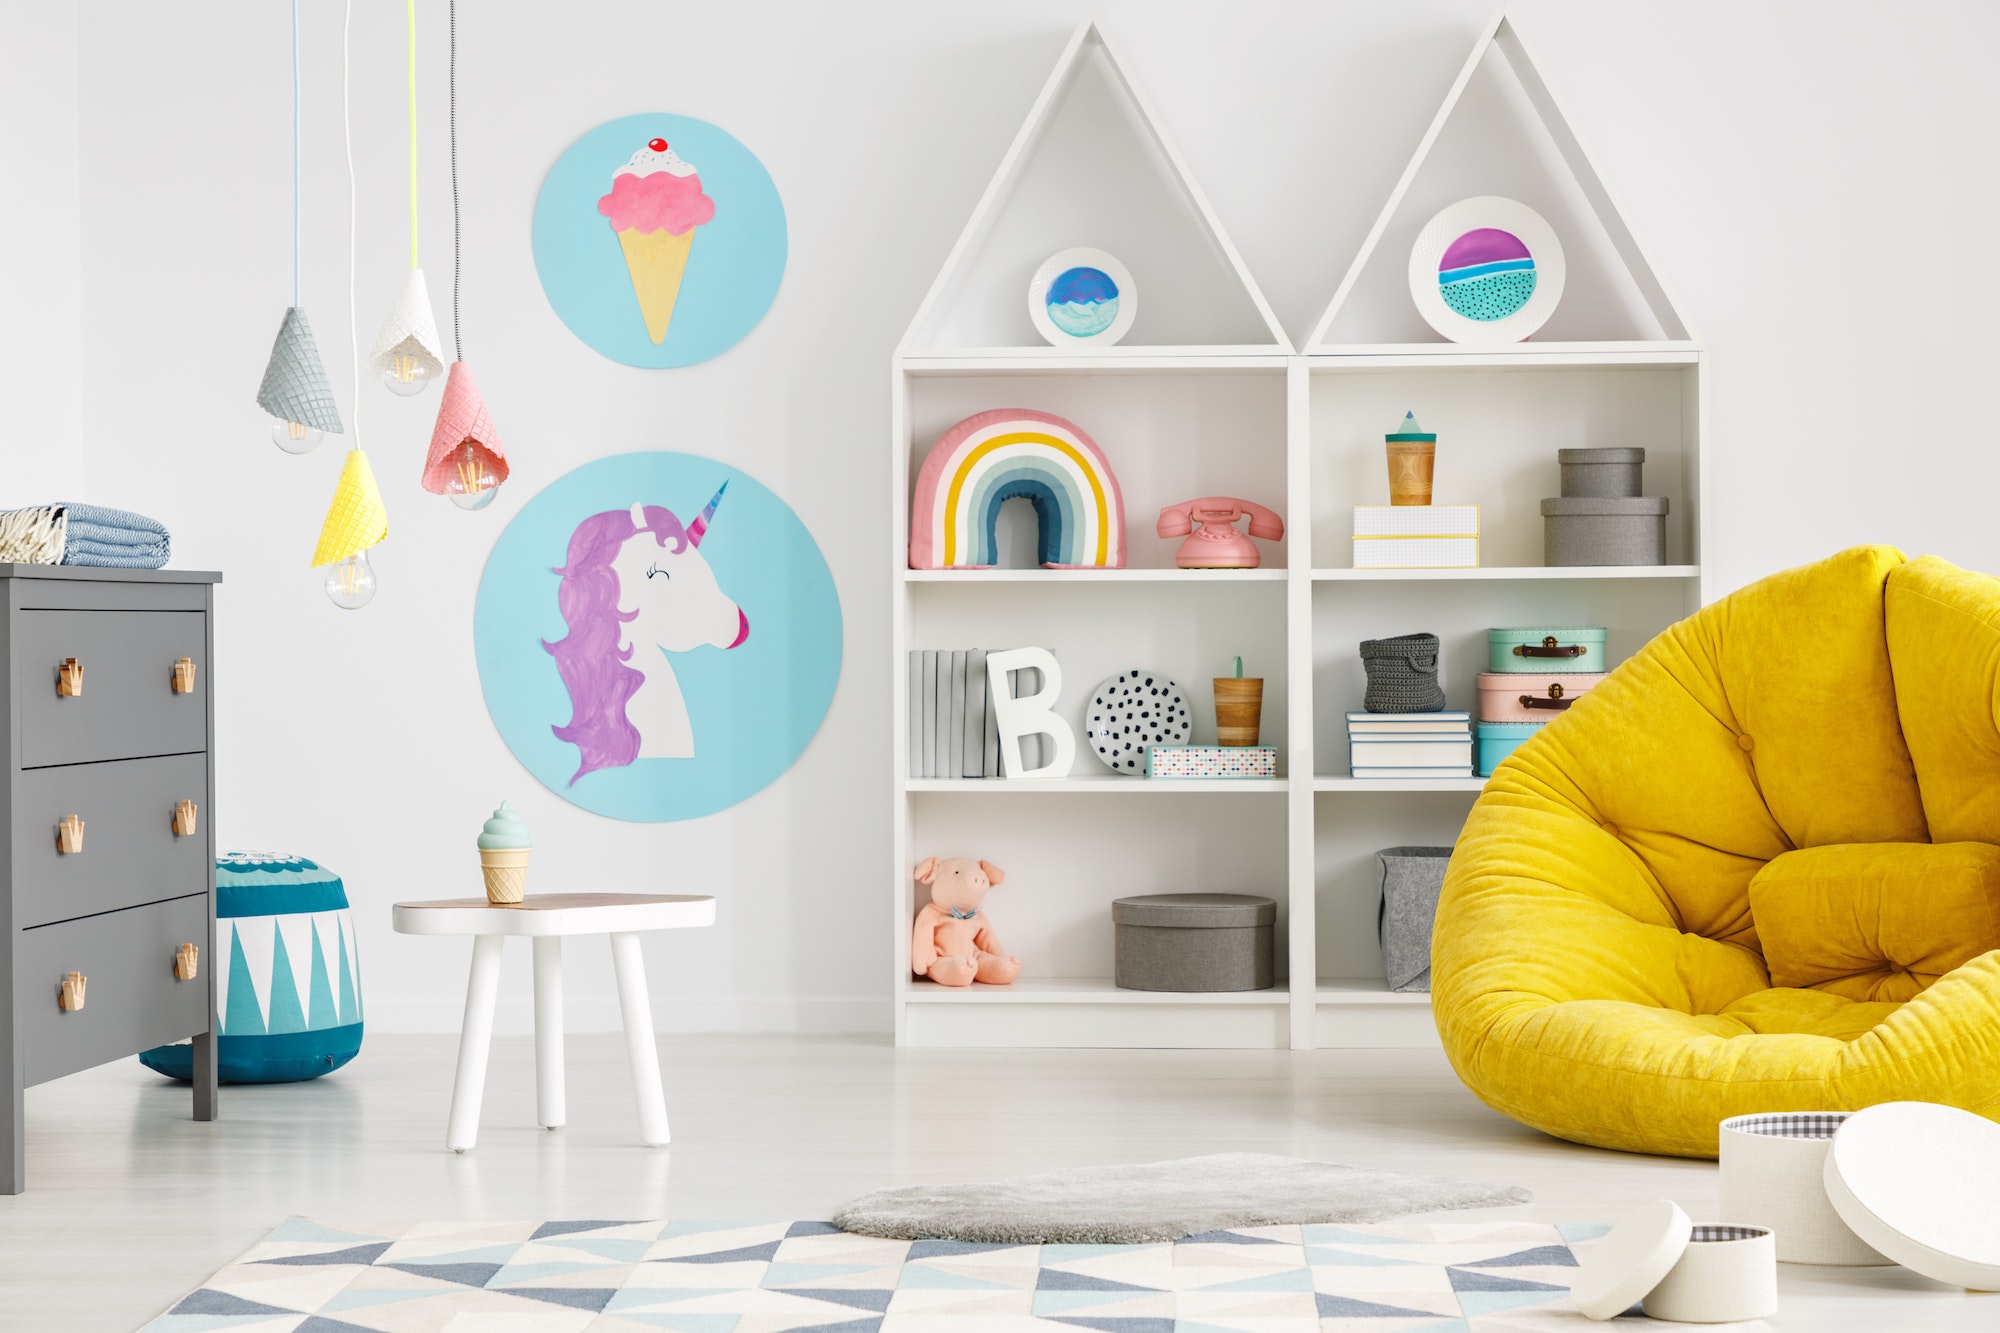 Yellow pouf in colorful child's room interior with lamps and pos